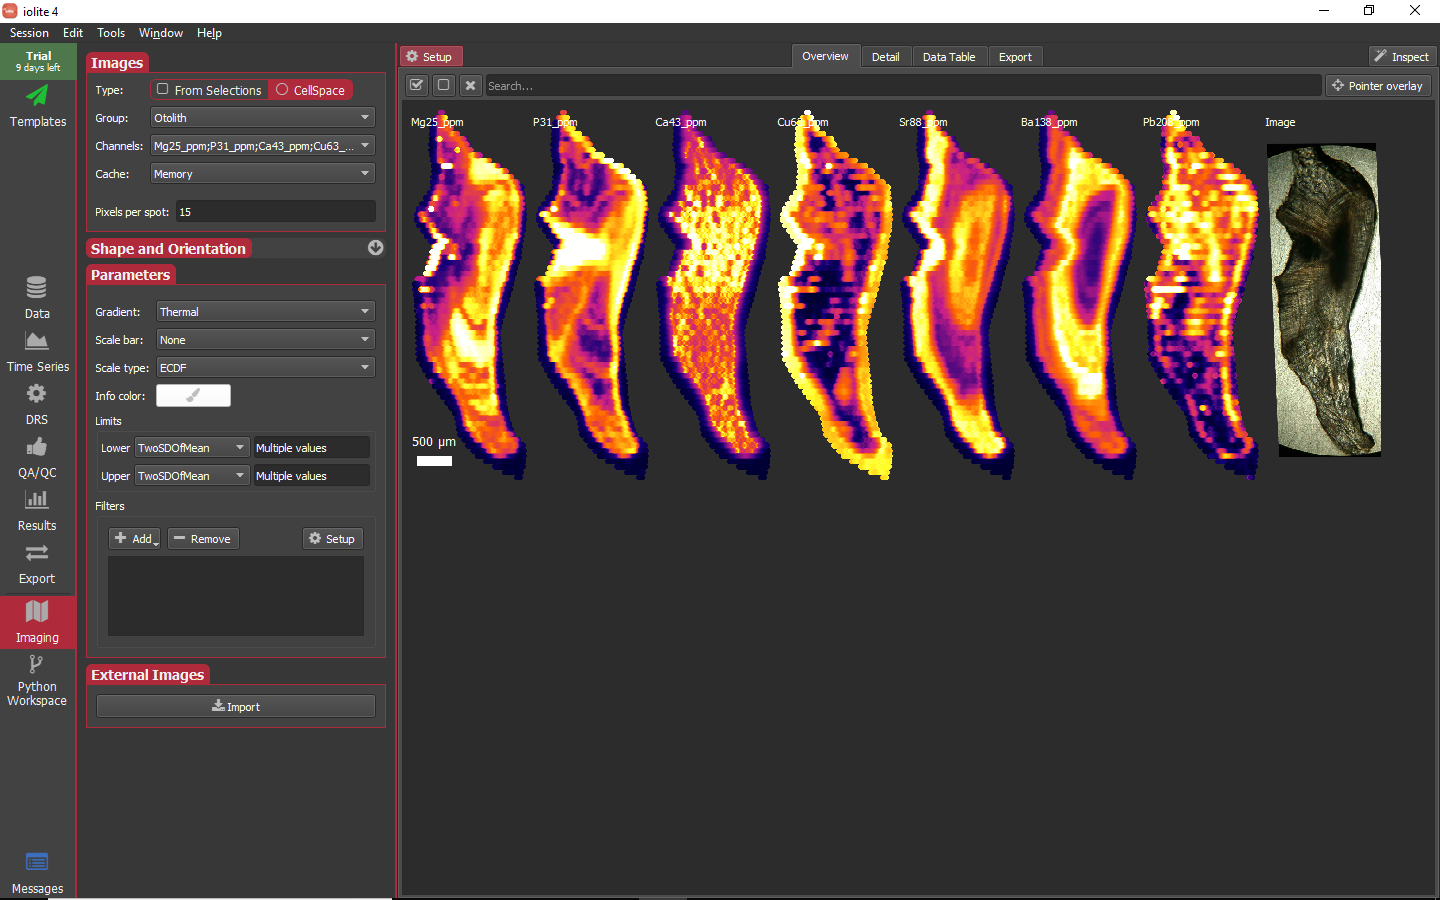 iolite guided examples imaging setup